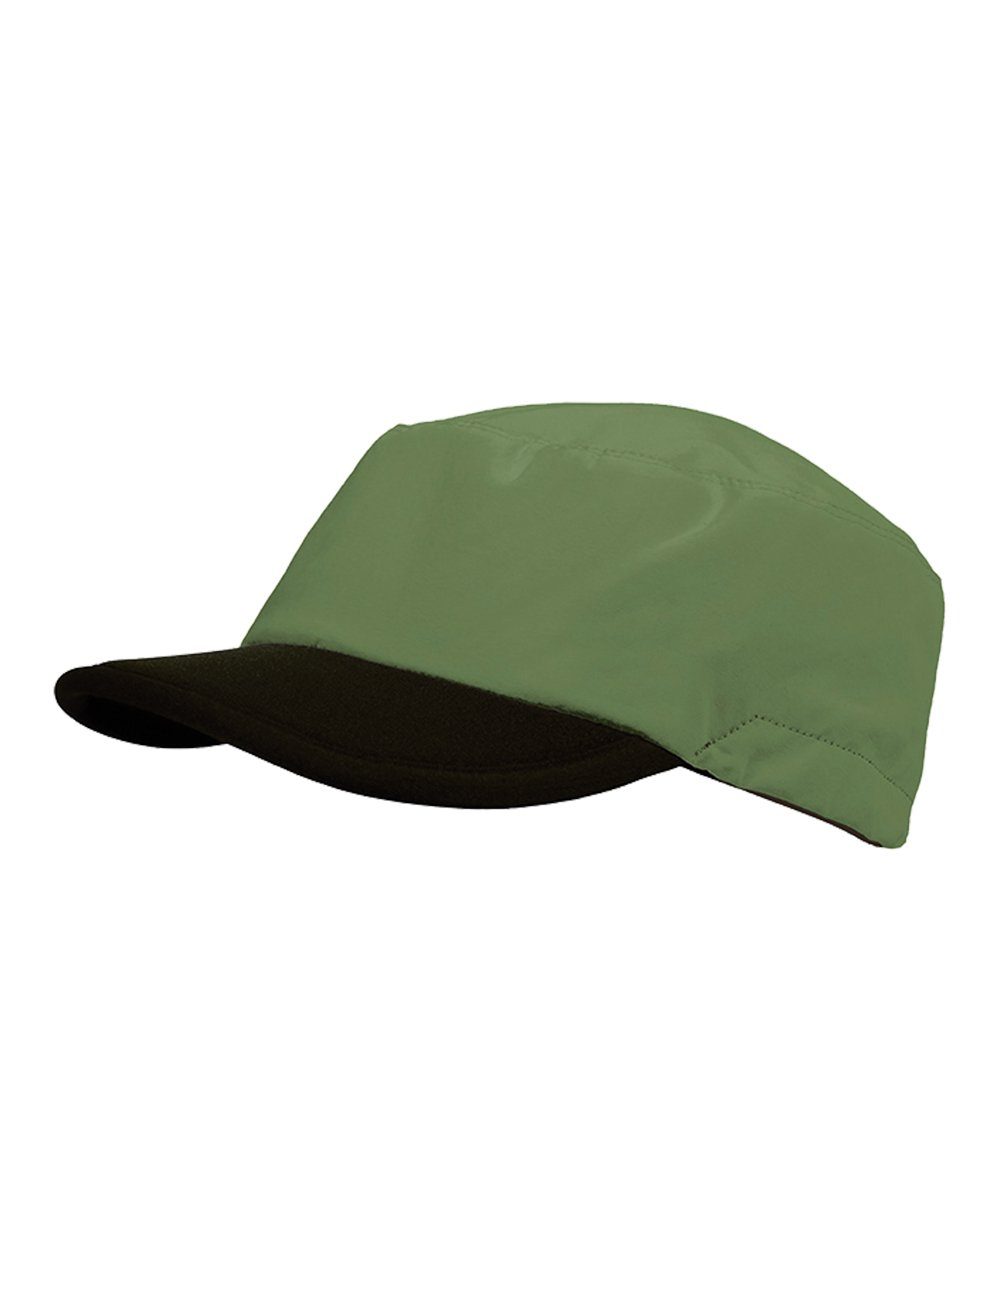 Europe CAPO-LIGHT in spinach Europe Made CAP Army Cap in MILITARY Made CAPO